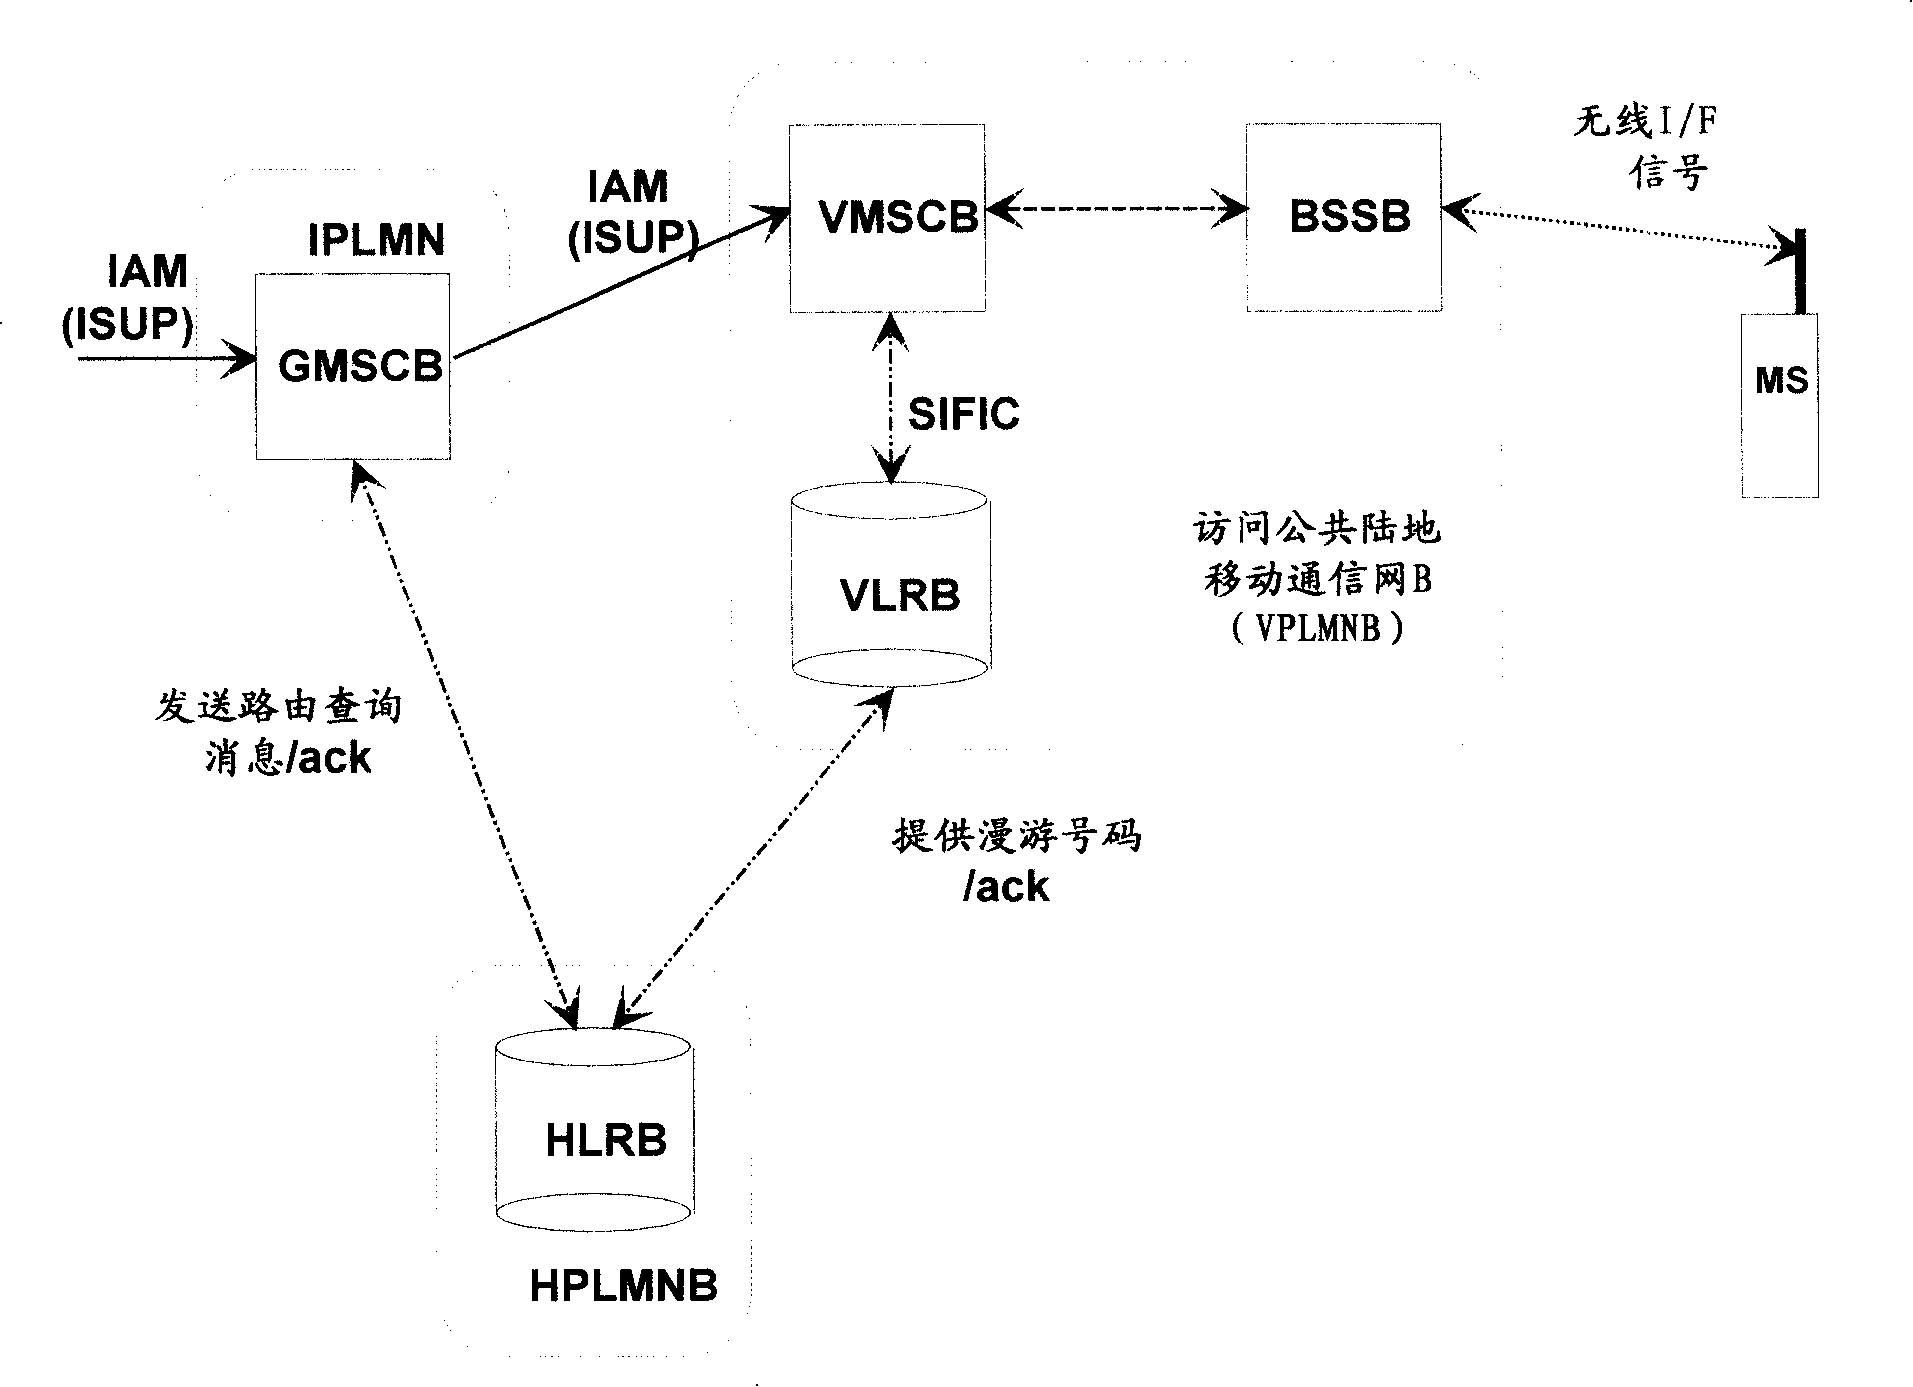 Trunked network interconnecting method and system